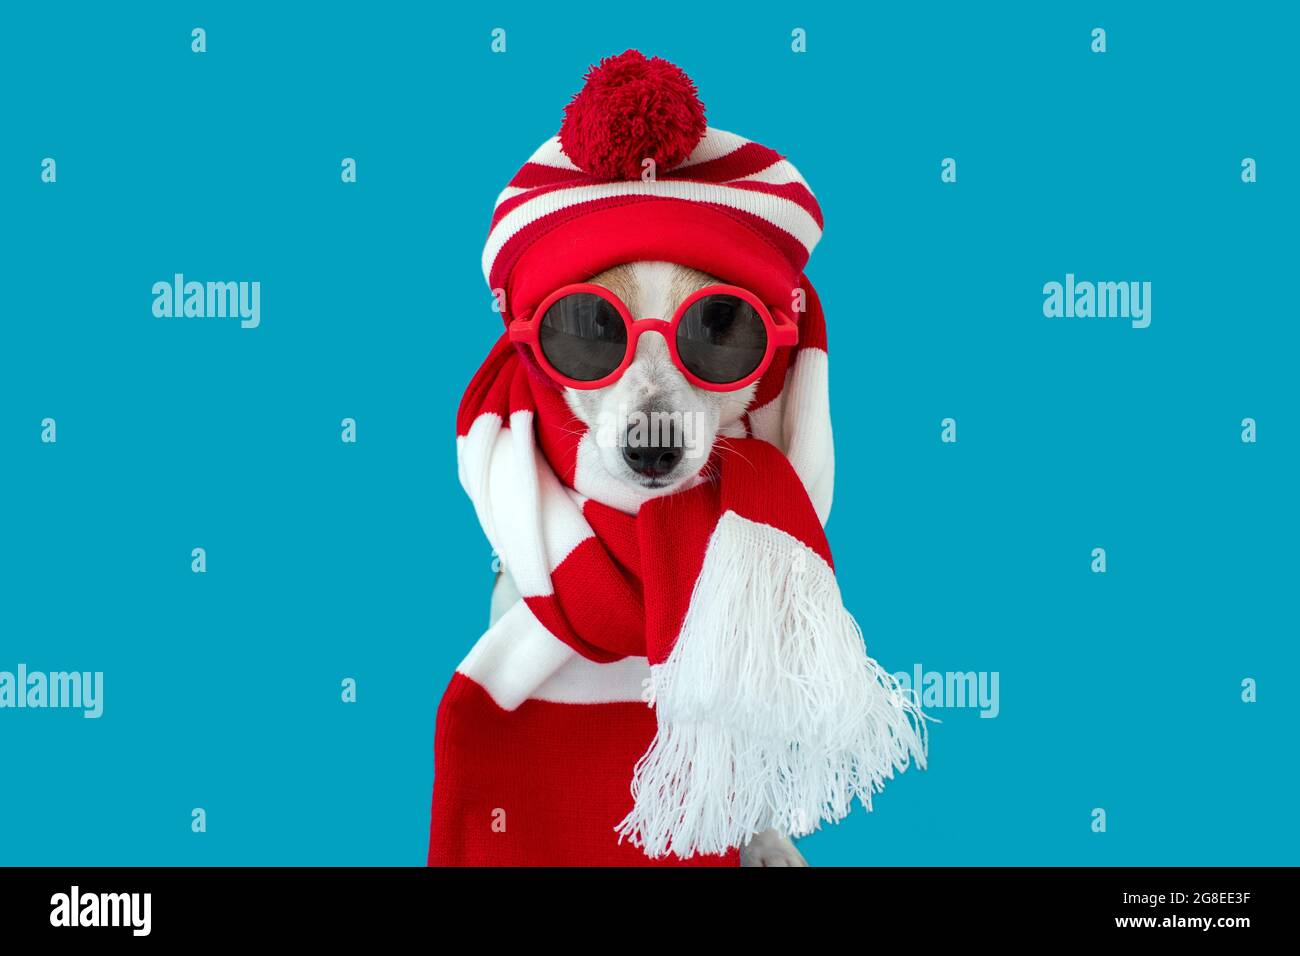 Dog wearing red sunglasses, knitted hat and scarf sitting and looking at camera isolated on blue background Stock Photo